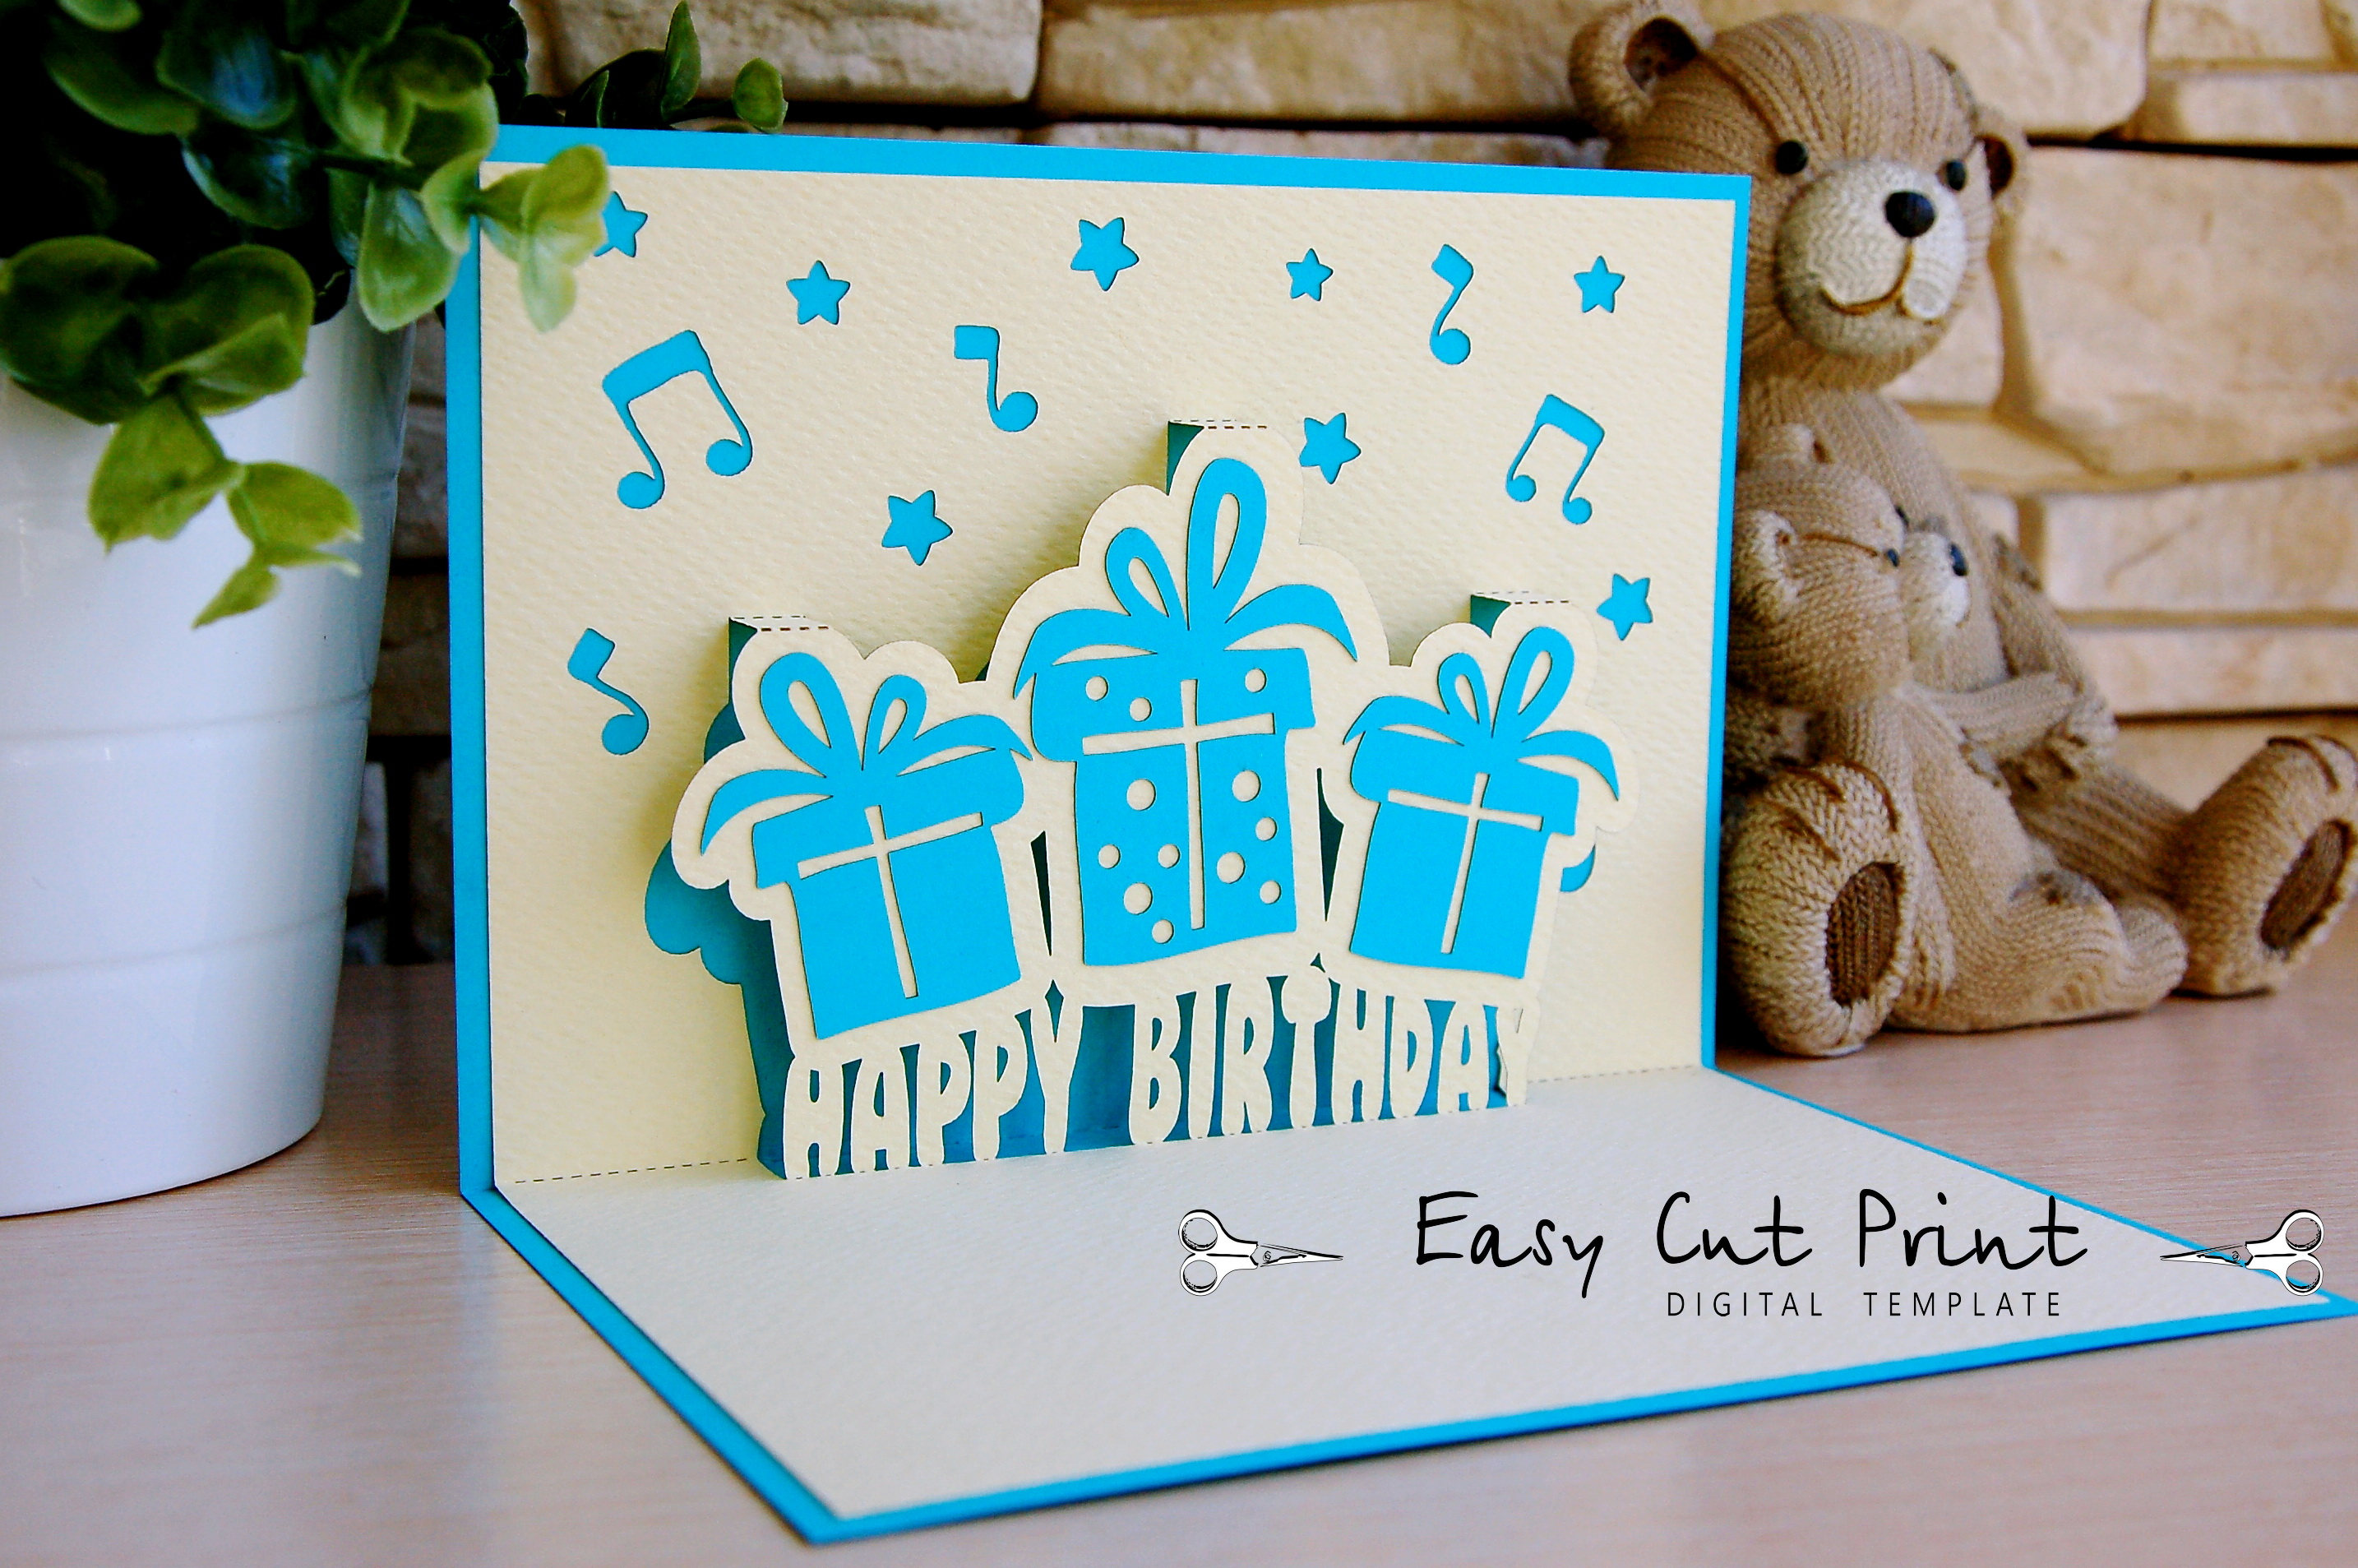 Happy birthday 3D gift pop up Card Laser cut SVG DXF CDR